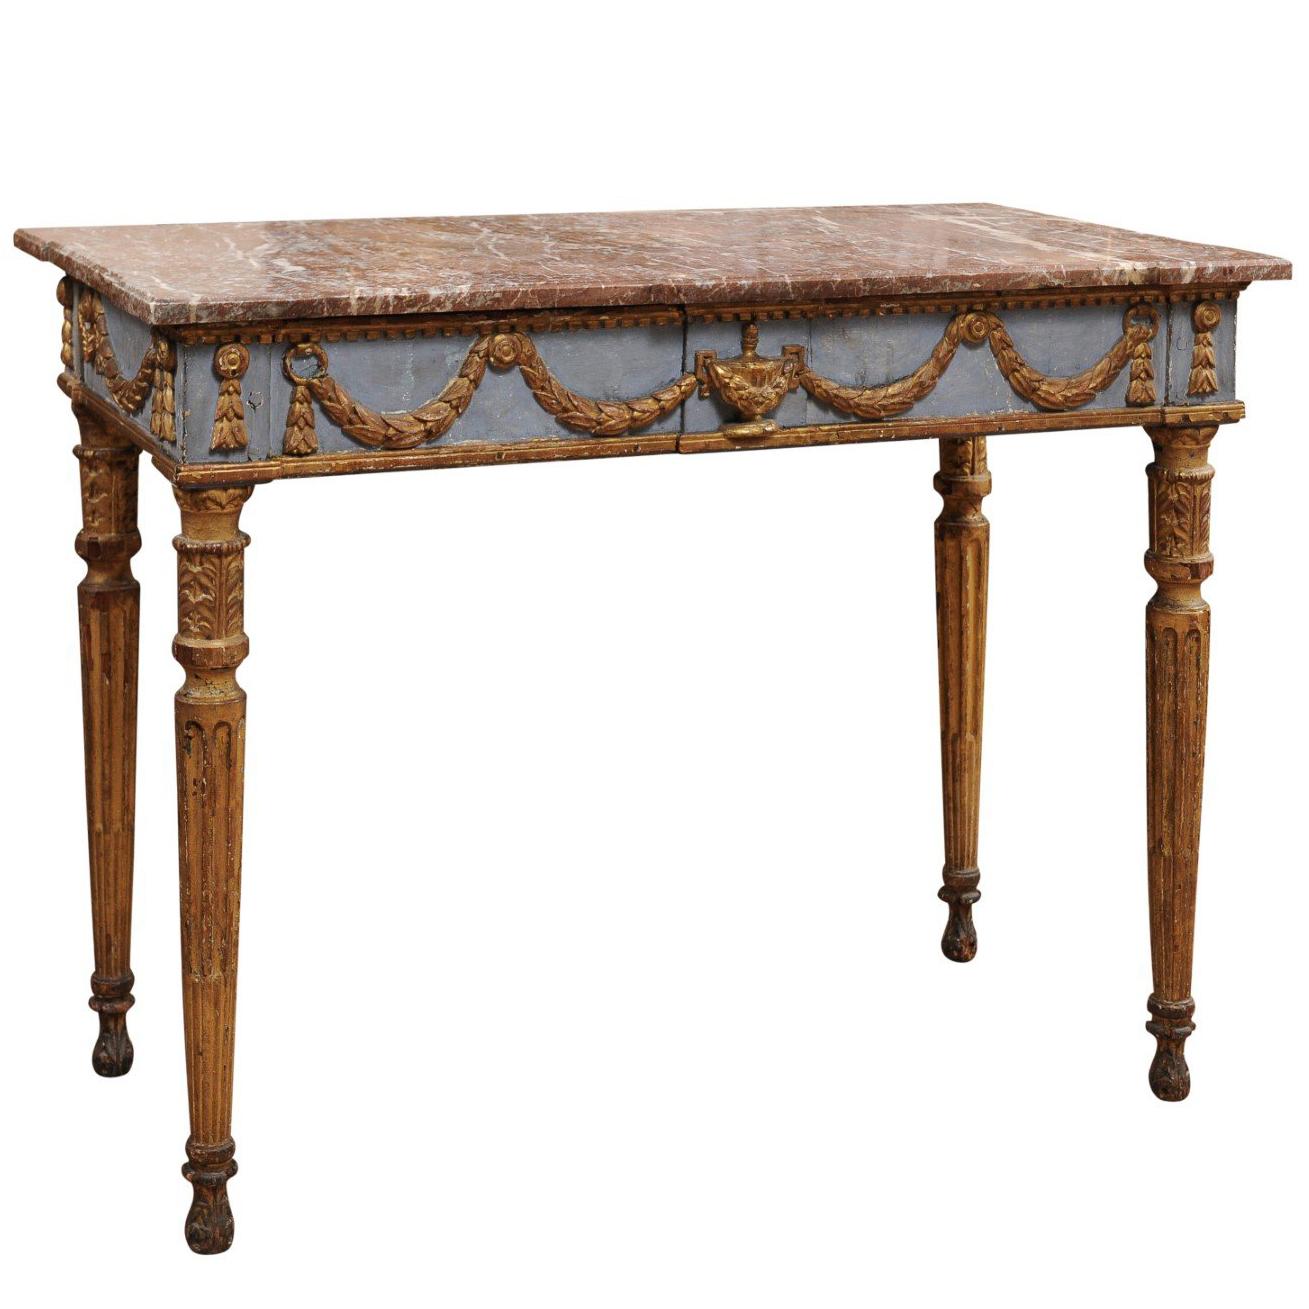 18th Century Italian Neoclassical Painted and Parcel-Gilt Center/Console Table